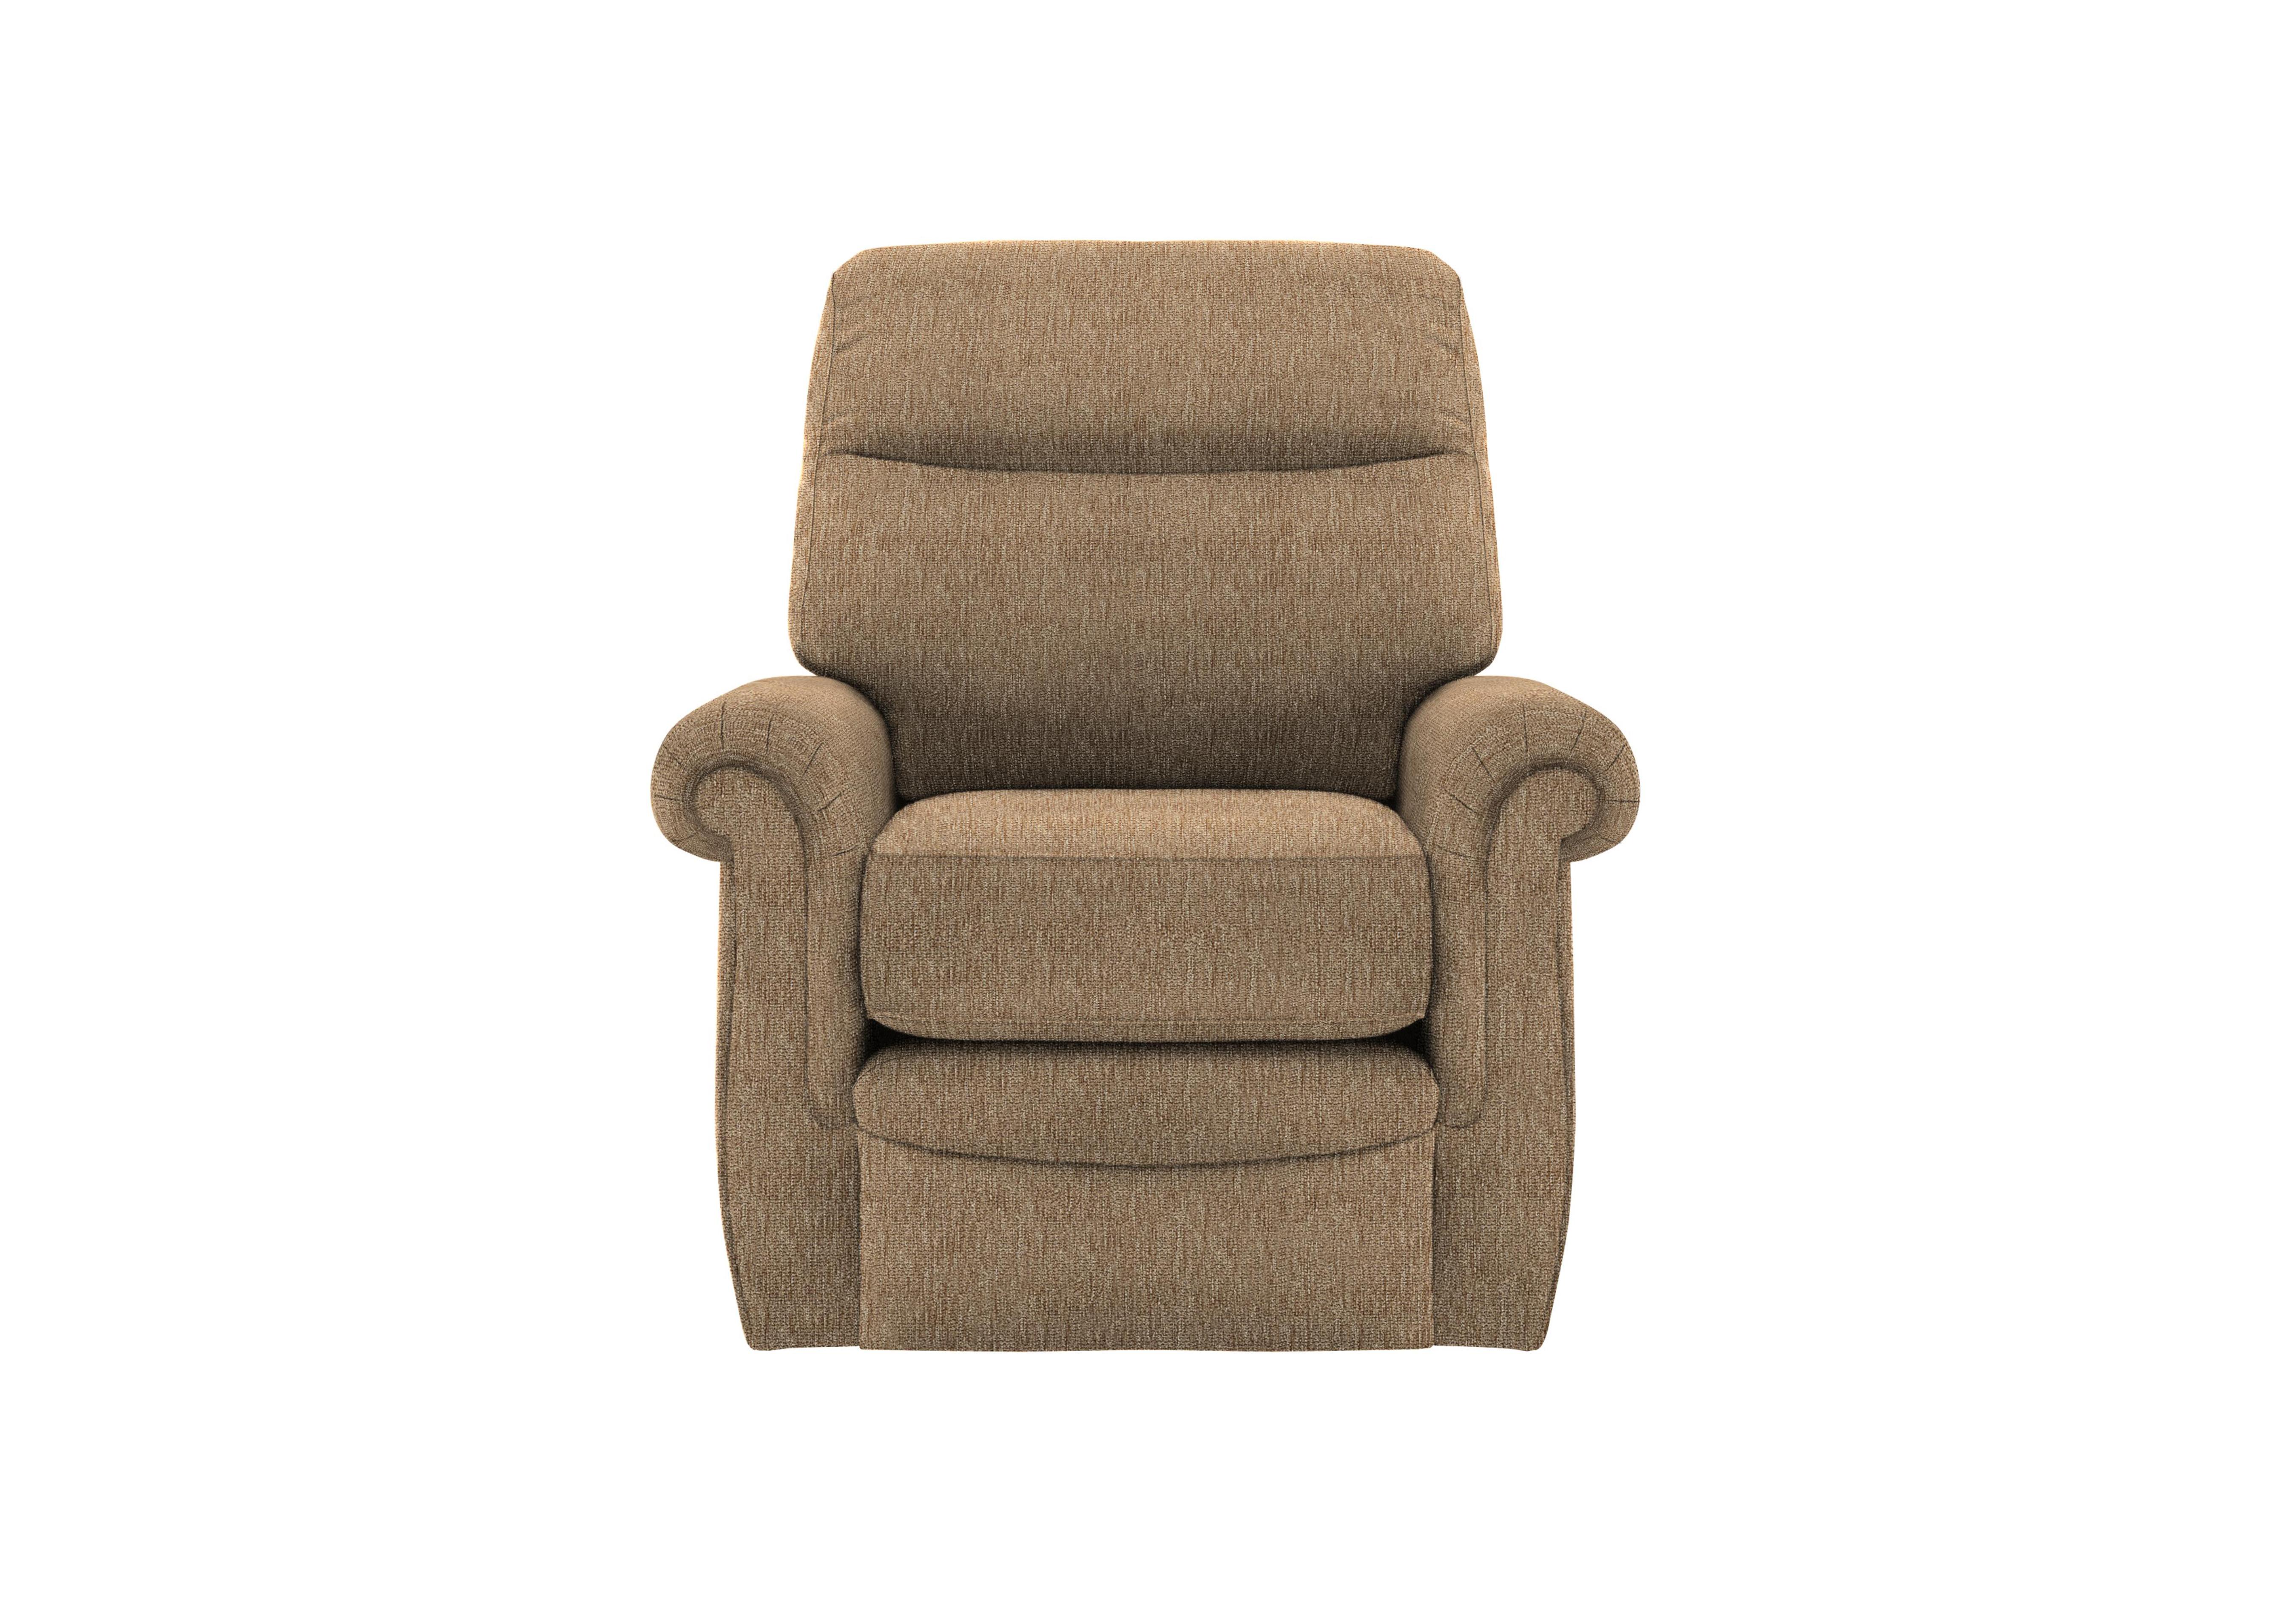 Avon Fabric Lift and Rise Armchair in A070 Boucle Cocoa on Furniture Village